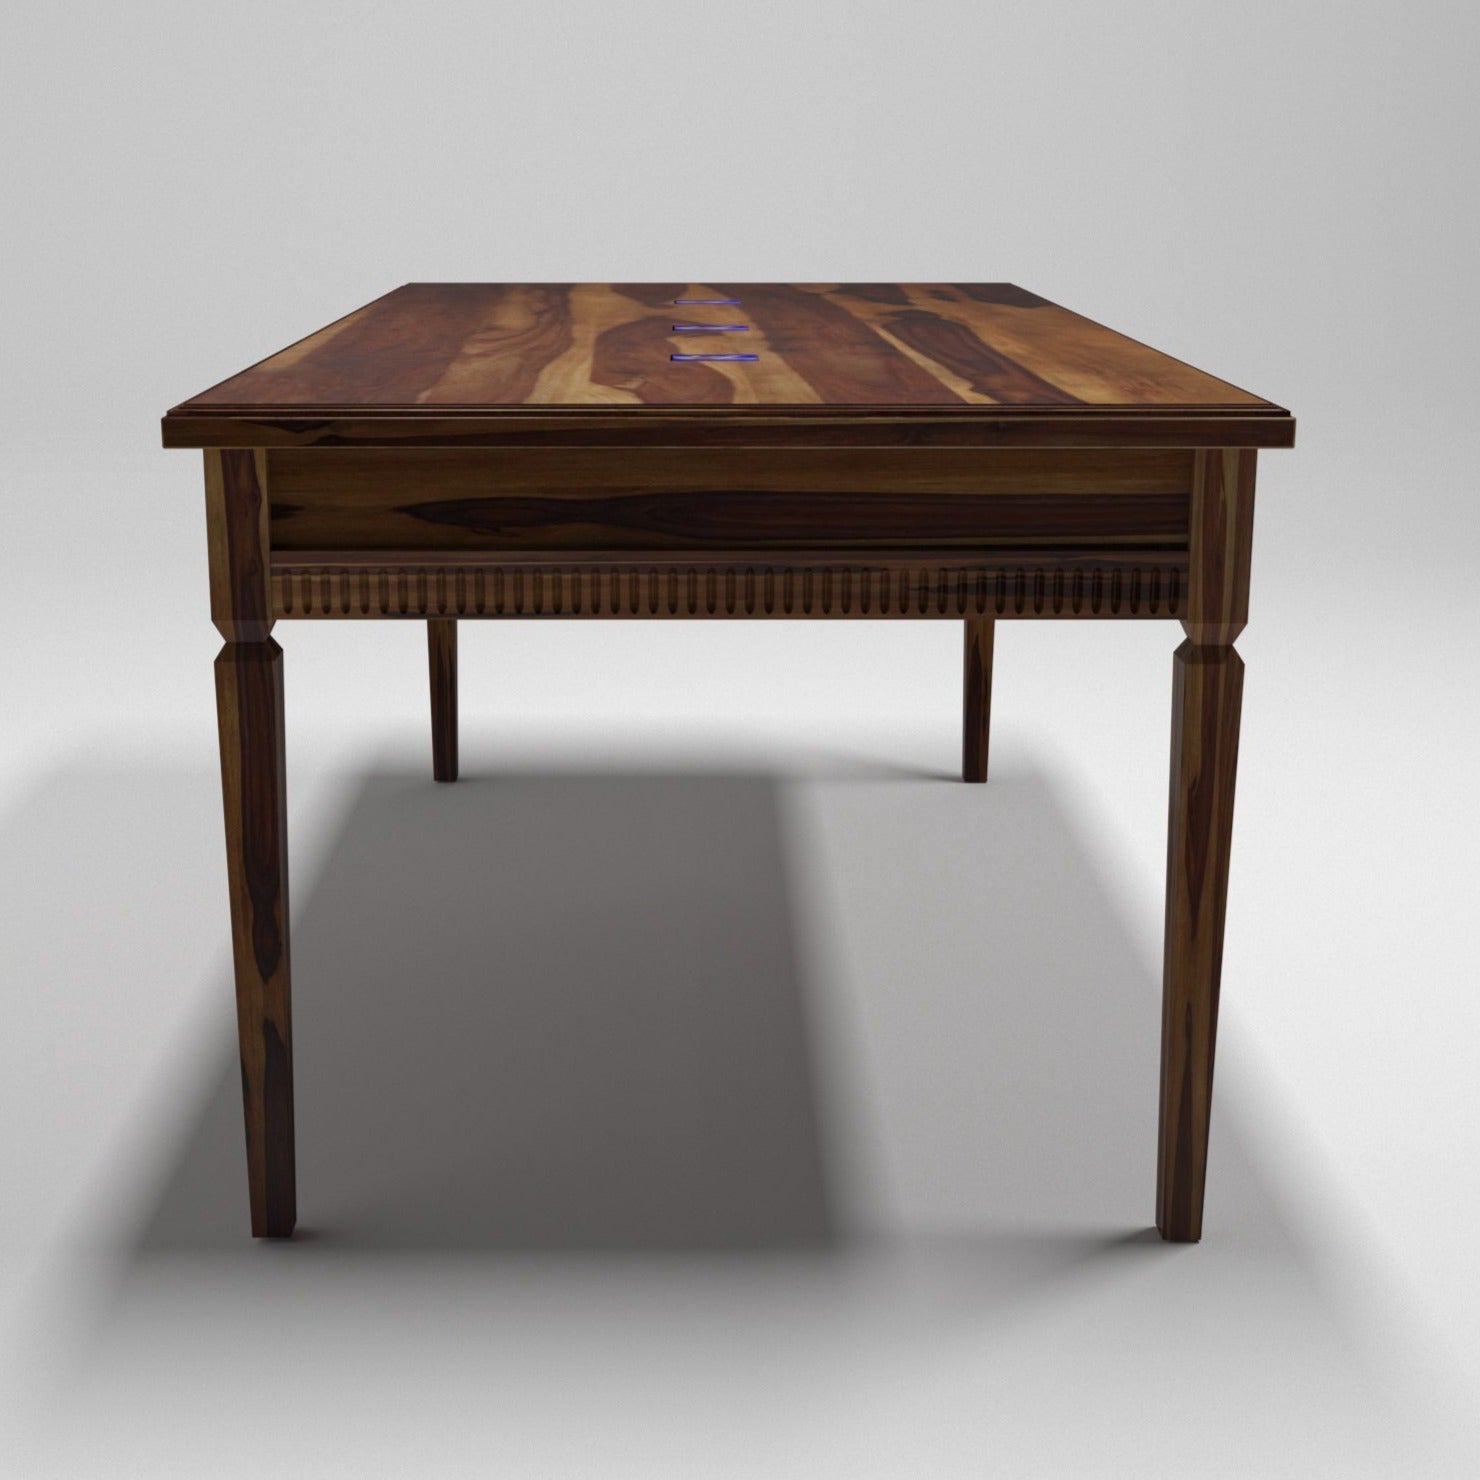 Classical Tiled Table Dining Table